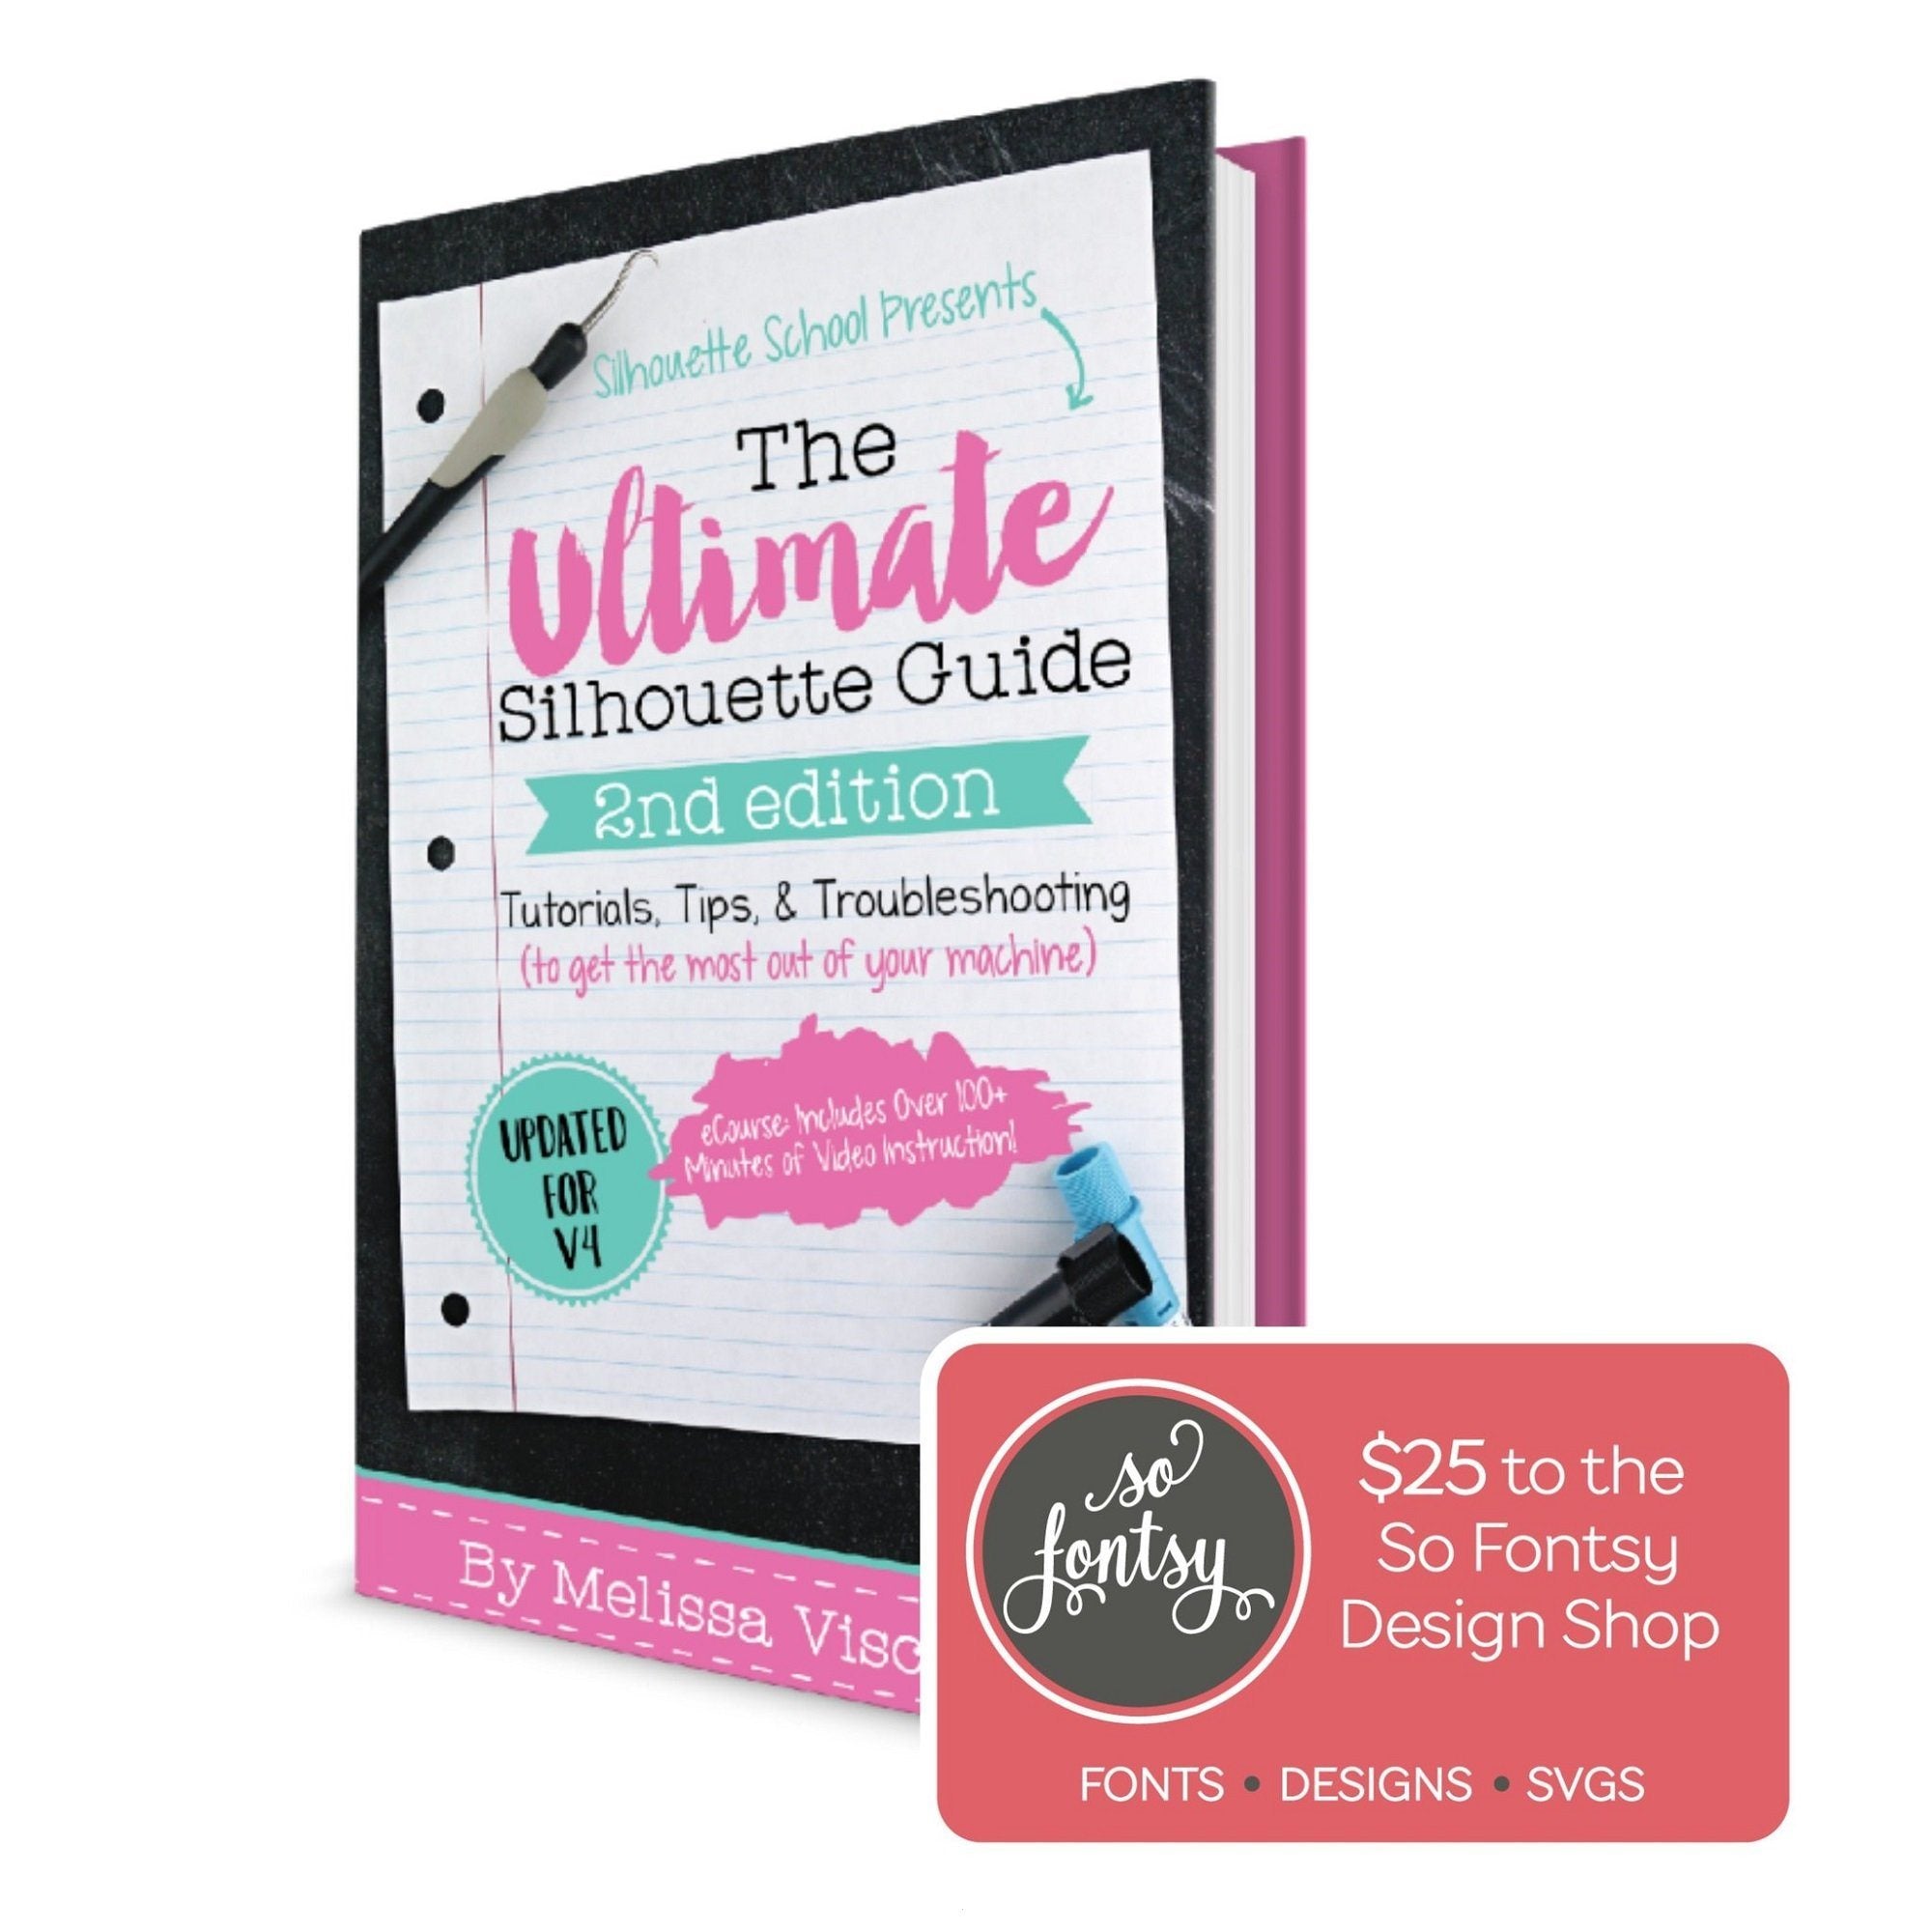 The Ultimate Silhouette Print and Cut Guide eBook – Ultimate Silhouette  Guide Series